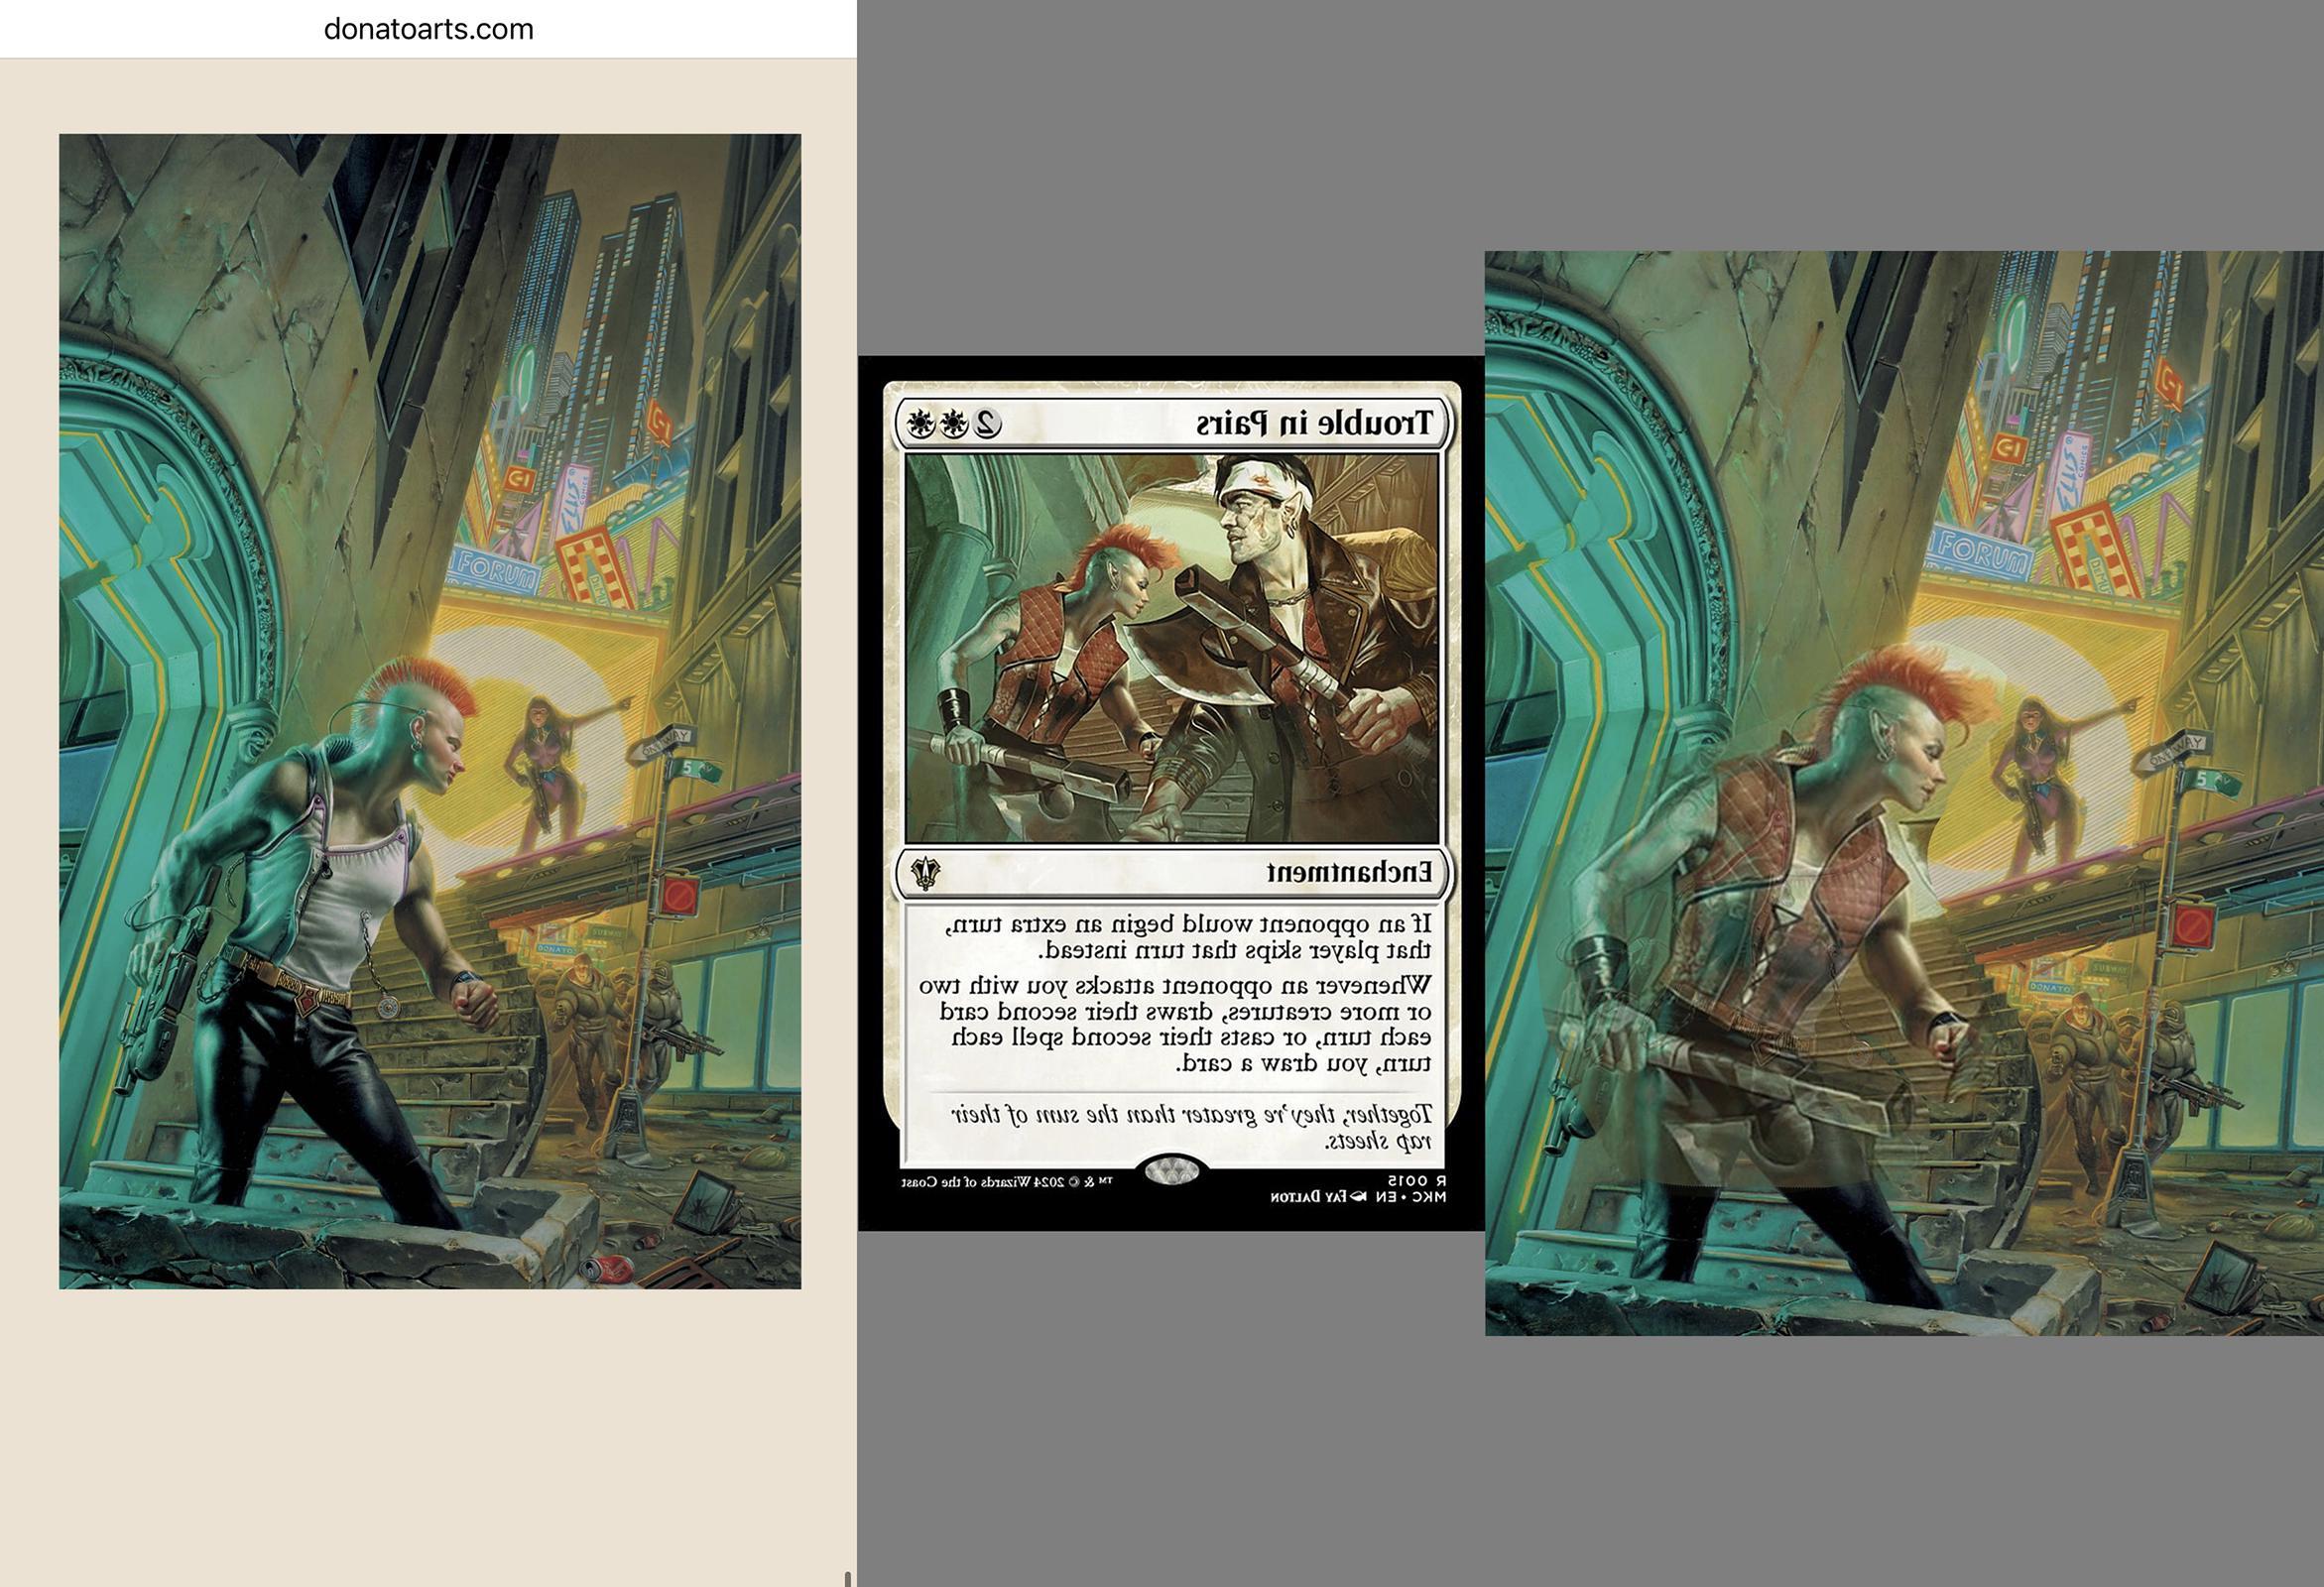 On r/MagicTCG, user u/hypnotichog gave proof that Fay Dalton stole art from Donato Giancola for Trouble in Pairs.